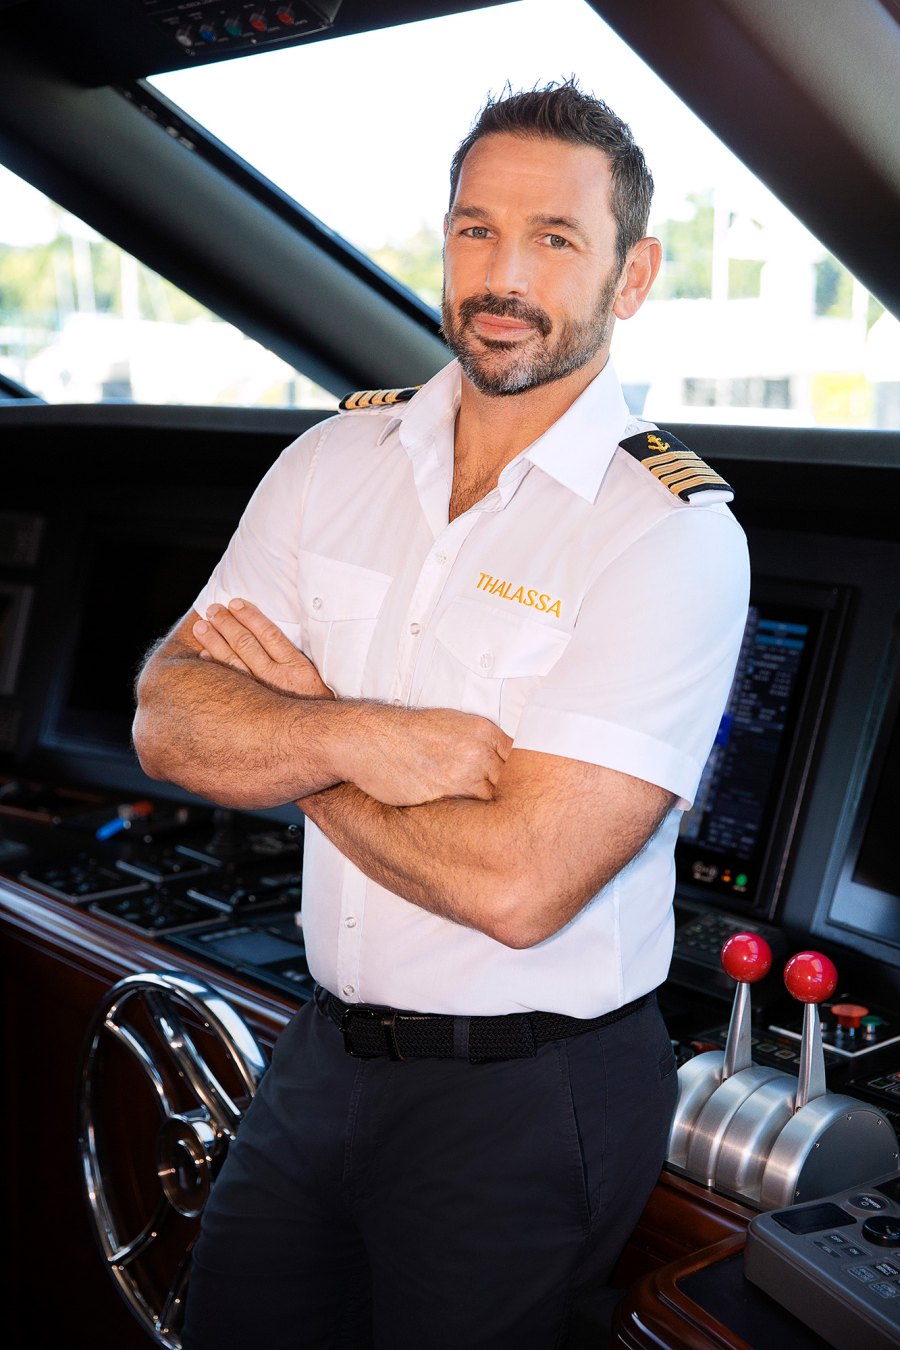 A Guide to Every Captain in the 'Below Deck' Franchise Over the Years- From Below Deck's Captain Lee to Below Deck Med's Captain Sandy 808